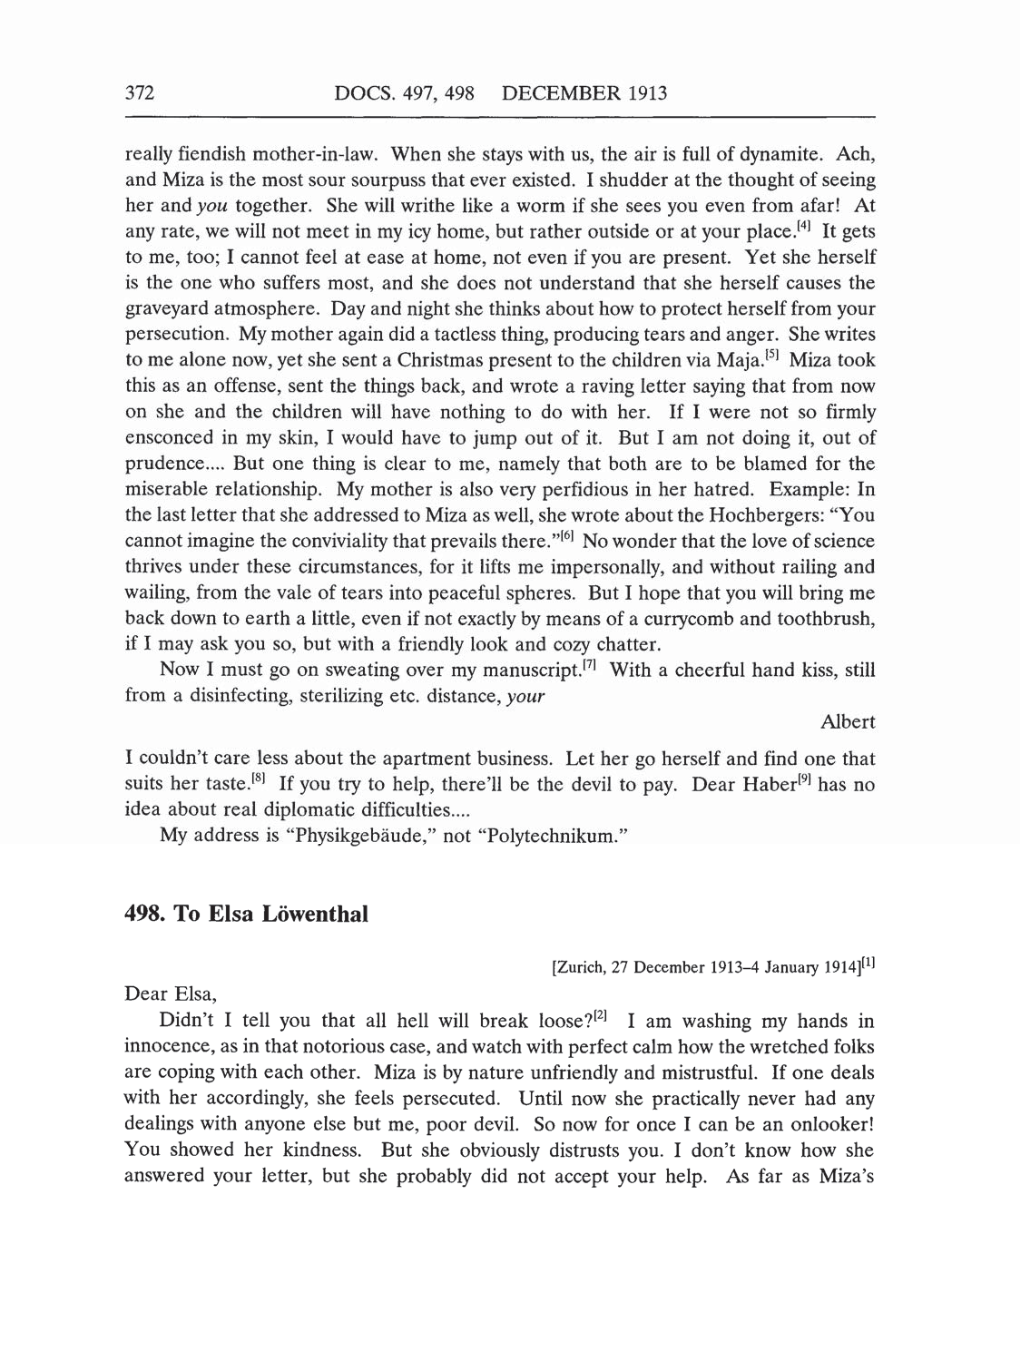 Volume 5: The Swiss Years: Correspondence, 1902-1914 (English translation supplement) page 372